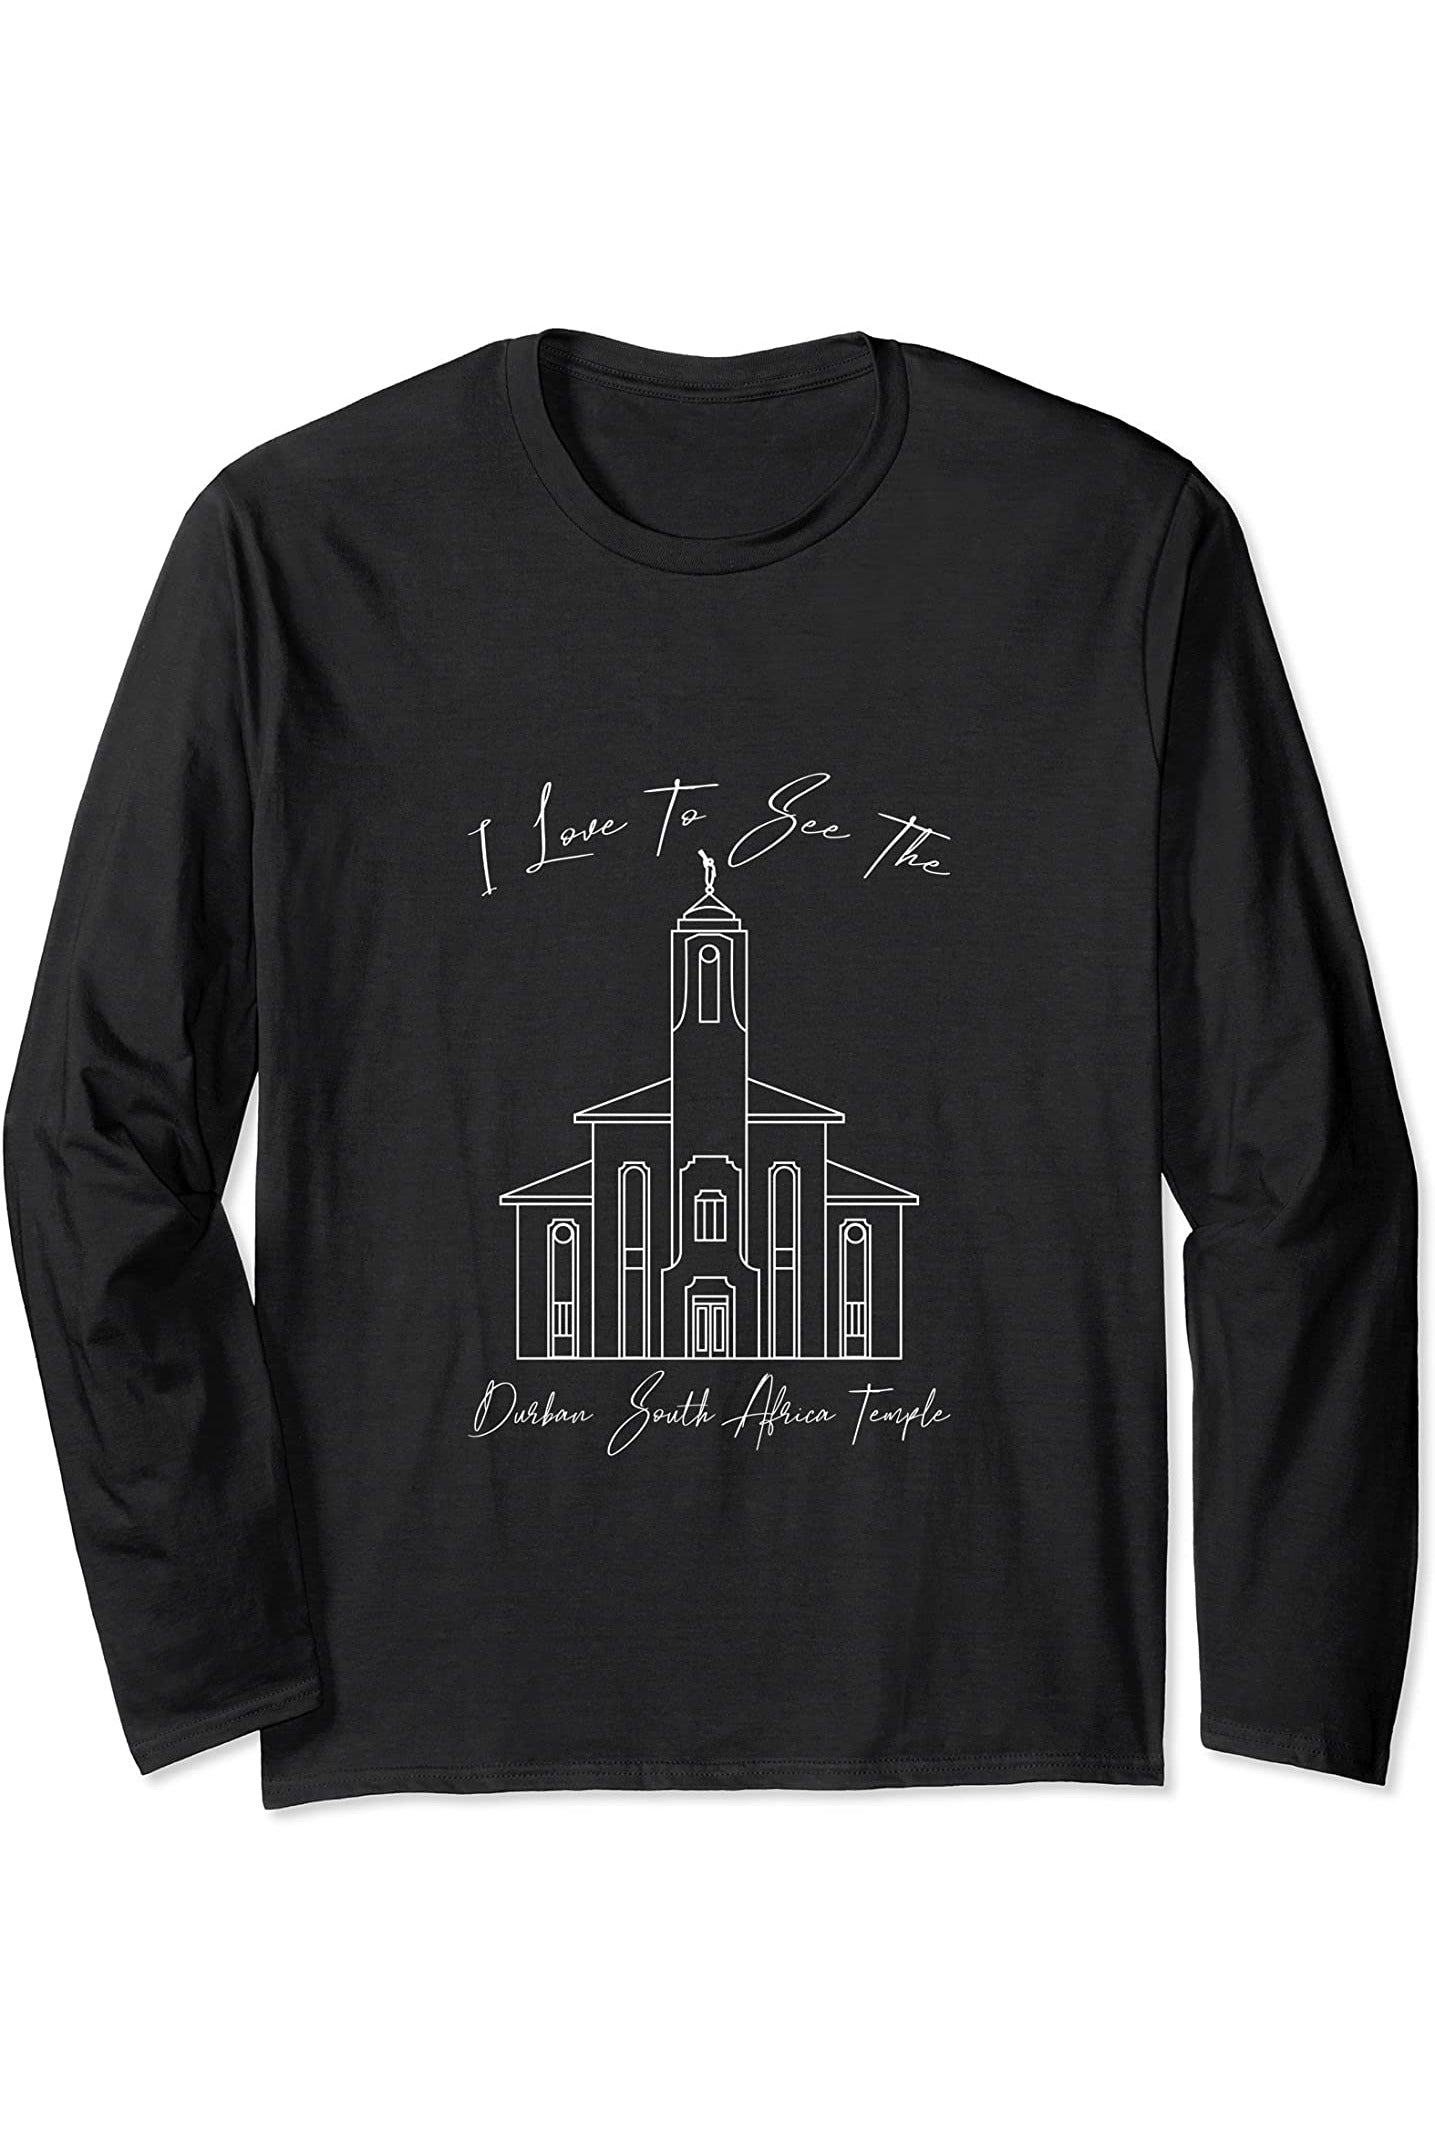 Durban South Africa Temple Long Sleeve T-Shirt - Calligraphy Style (English) US